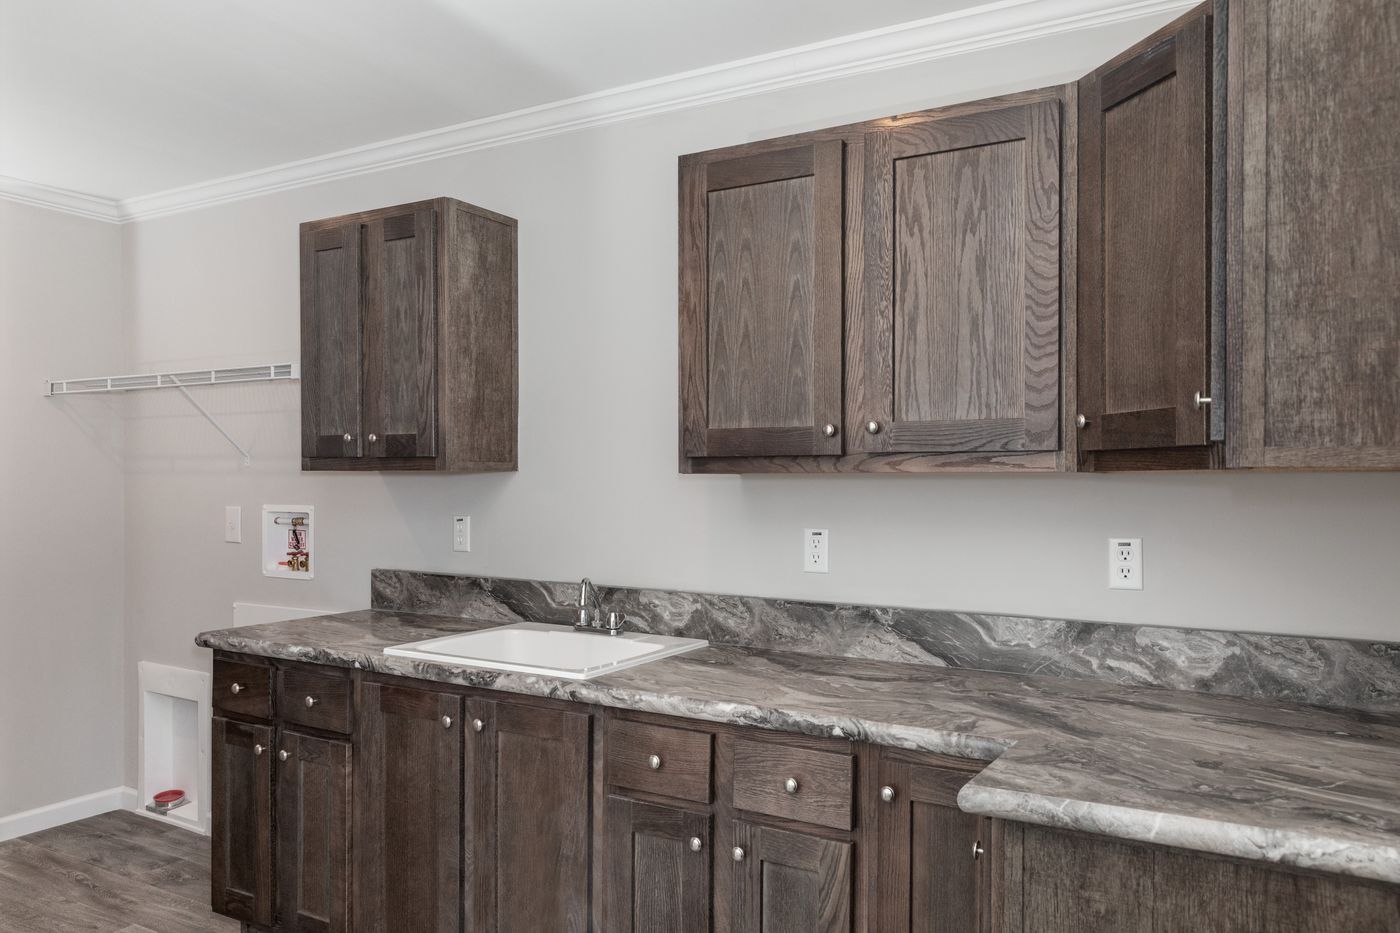 The THE VILLETTE Utility Room. This Manufactured Mobile Home features 3 bedrooms and 2 baths.